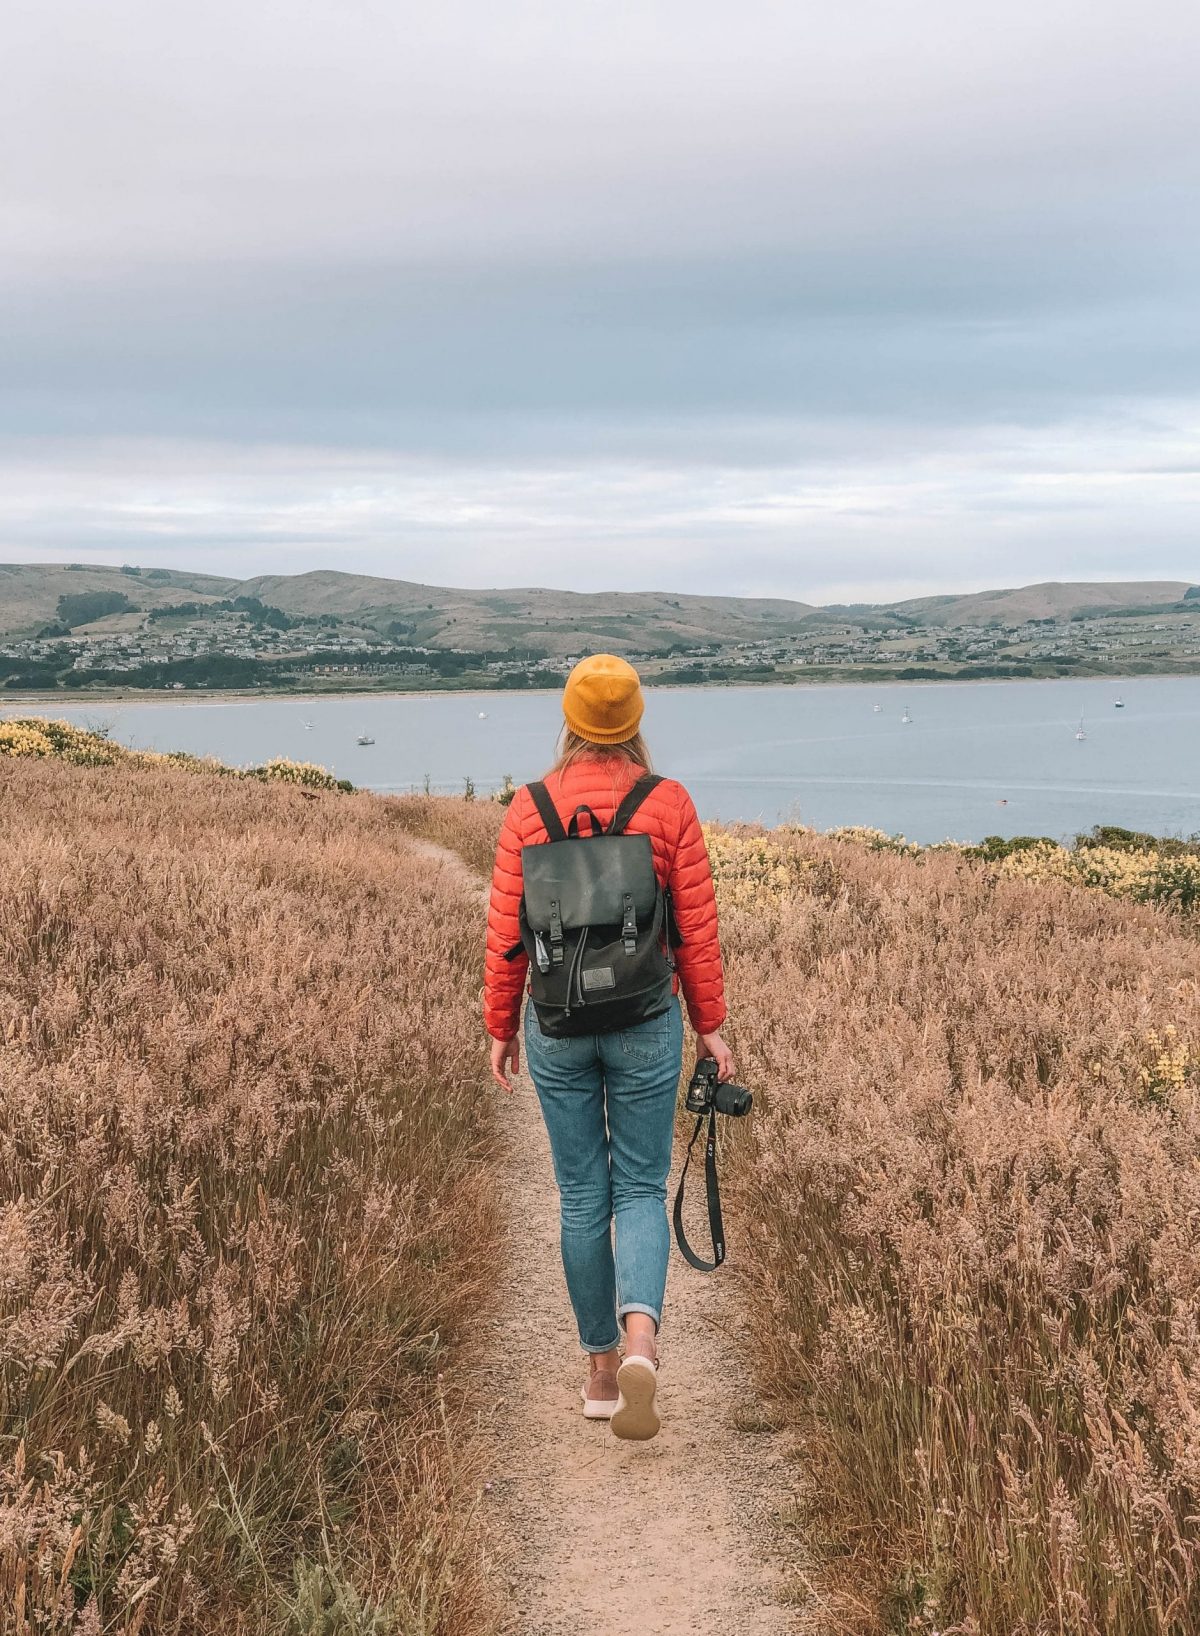 An outdoorsy woman walking on a hiking path with a backpack and camera in hand, looking out towards the water and hills in the background--outdoor gifts for women.